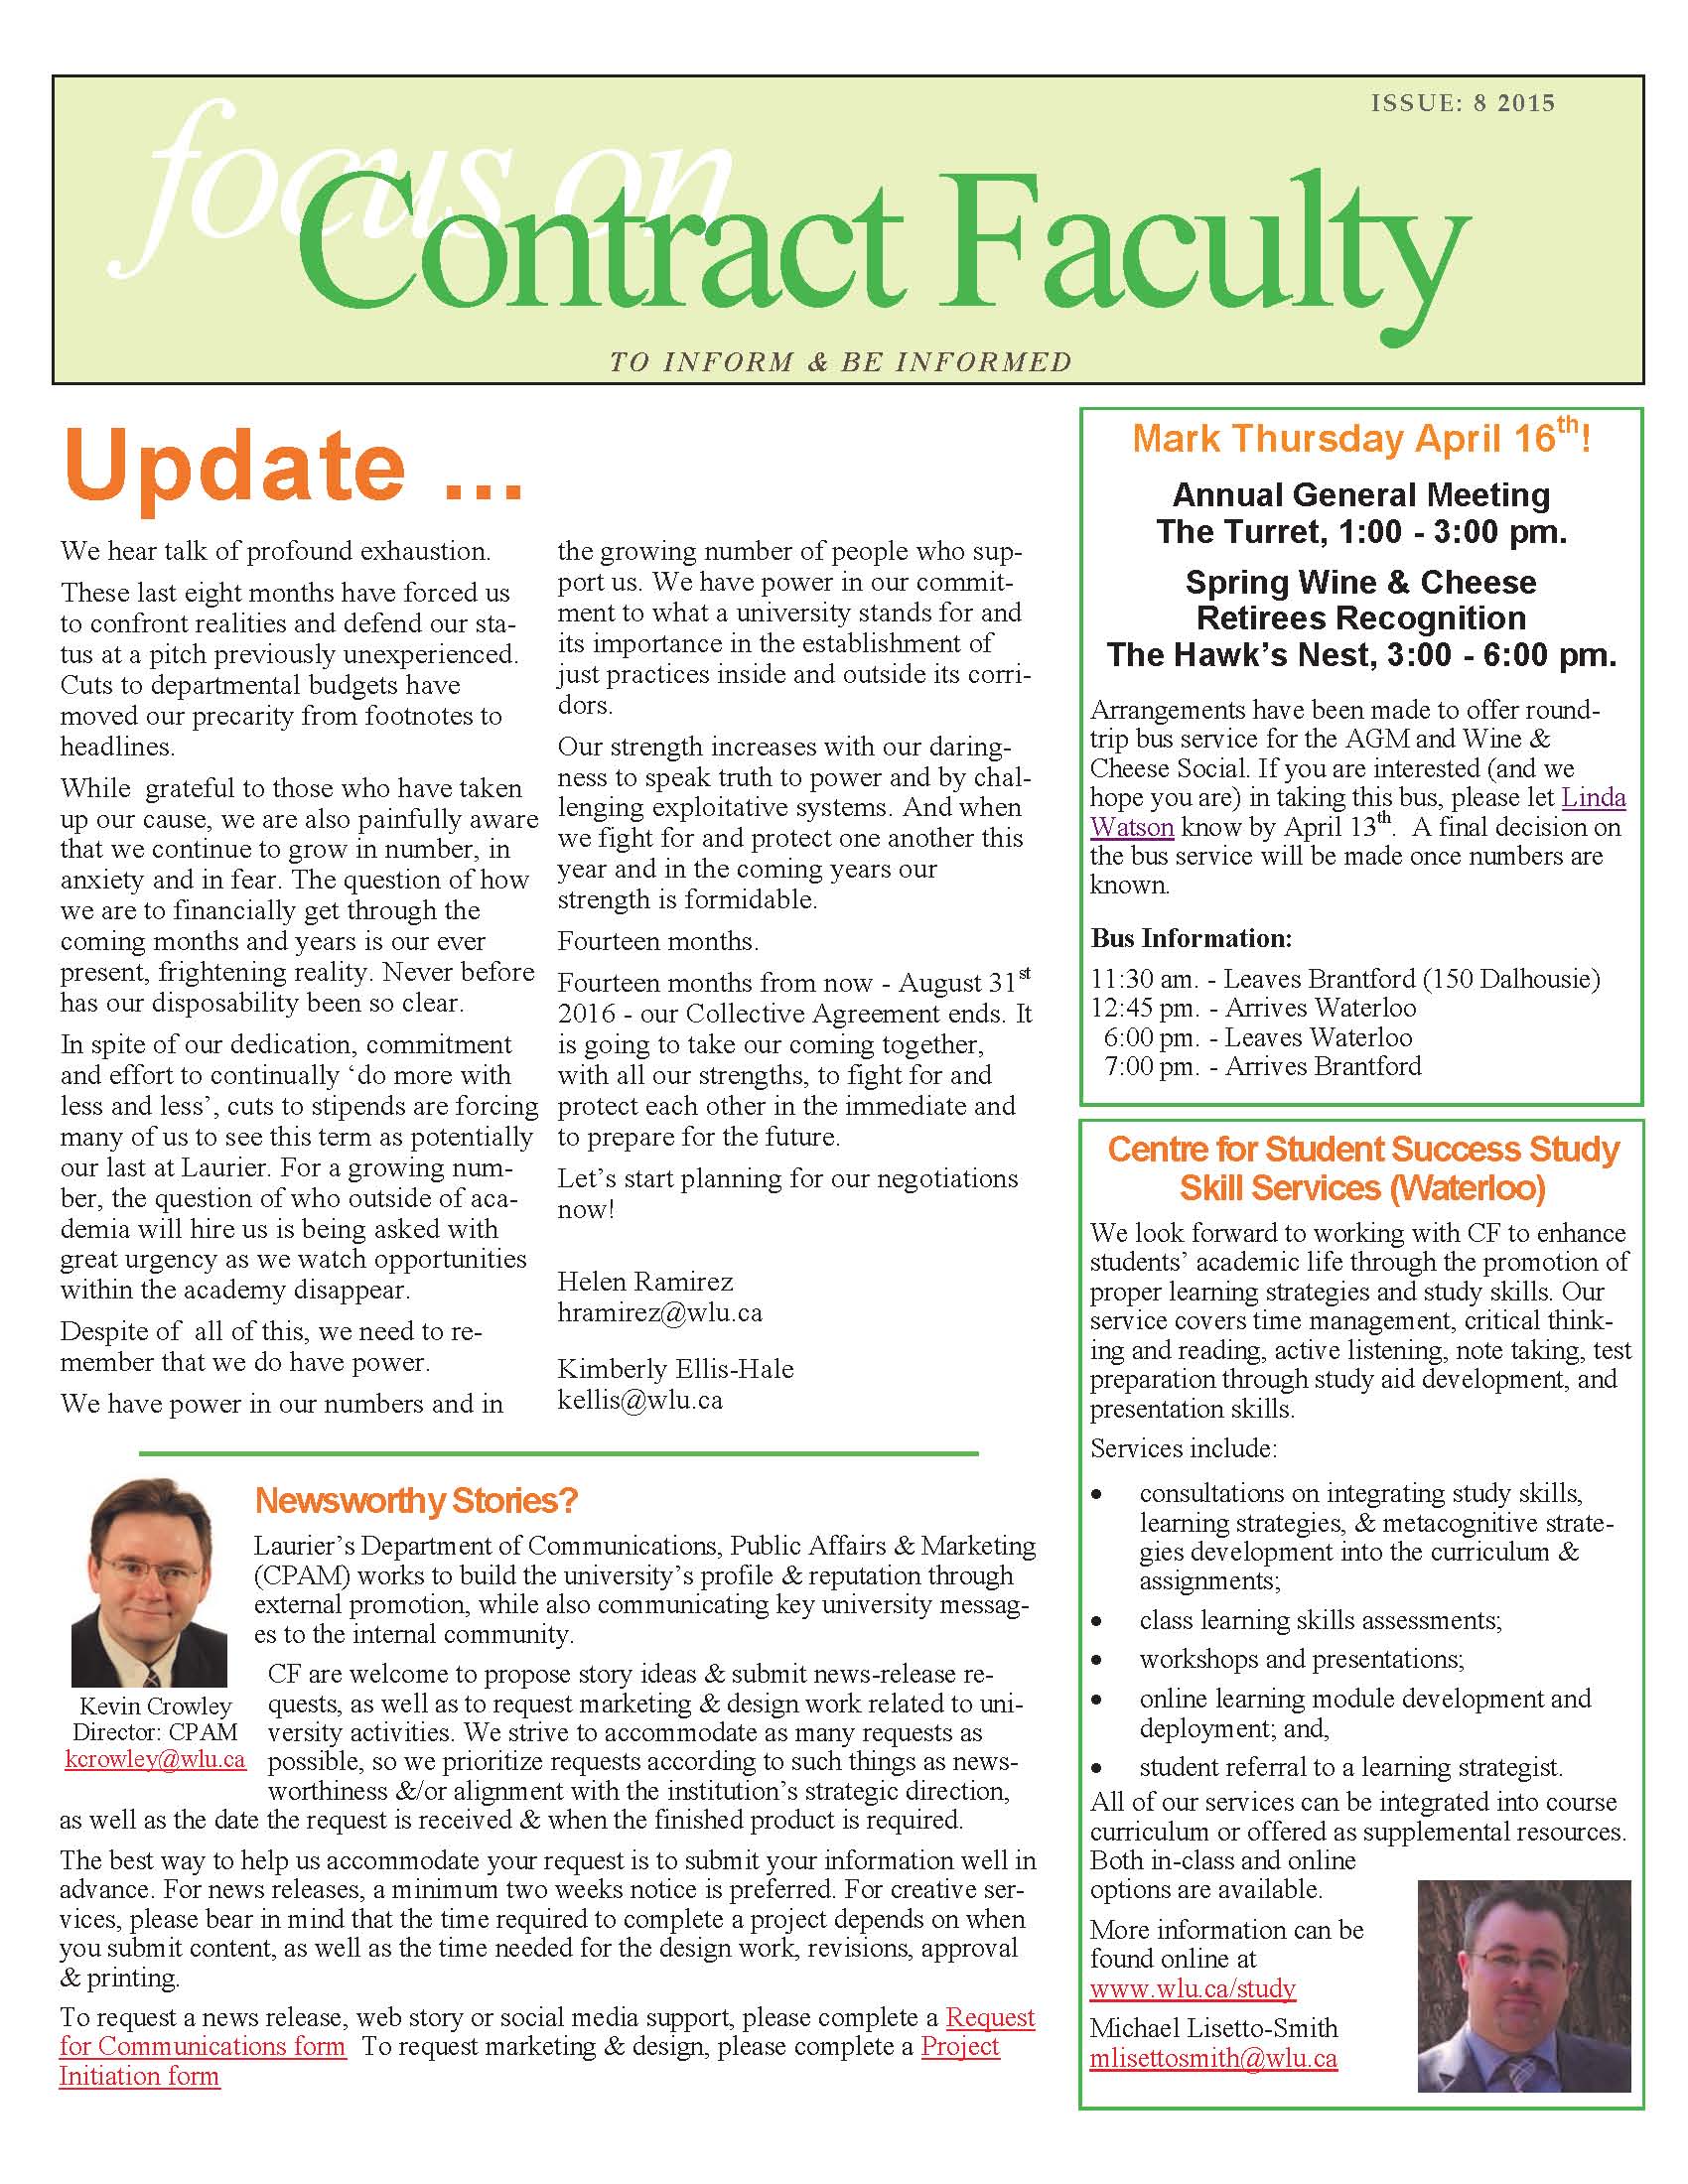 focus on contract faculty